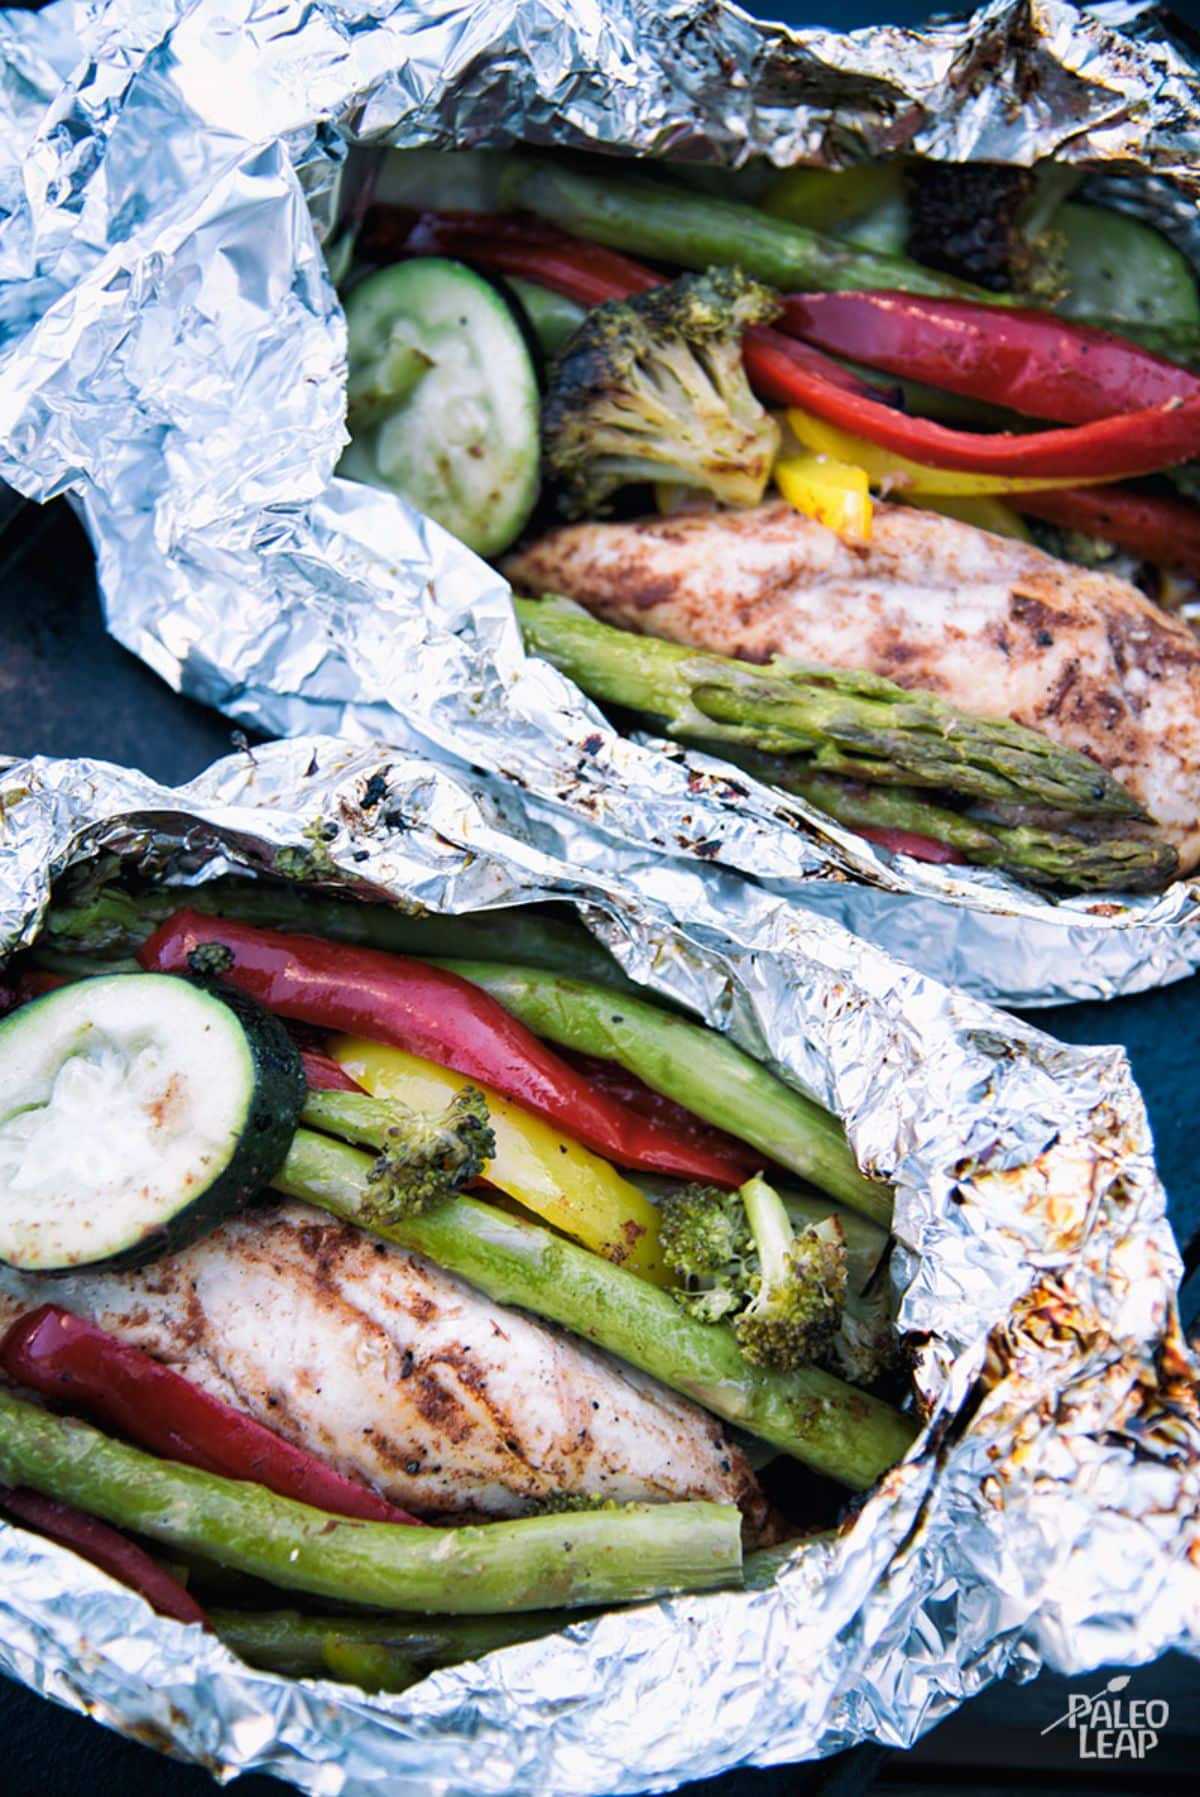 Chicken And Vegetables Grilled in Foil Packet